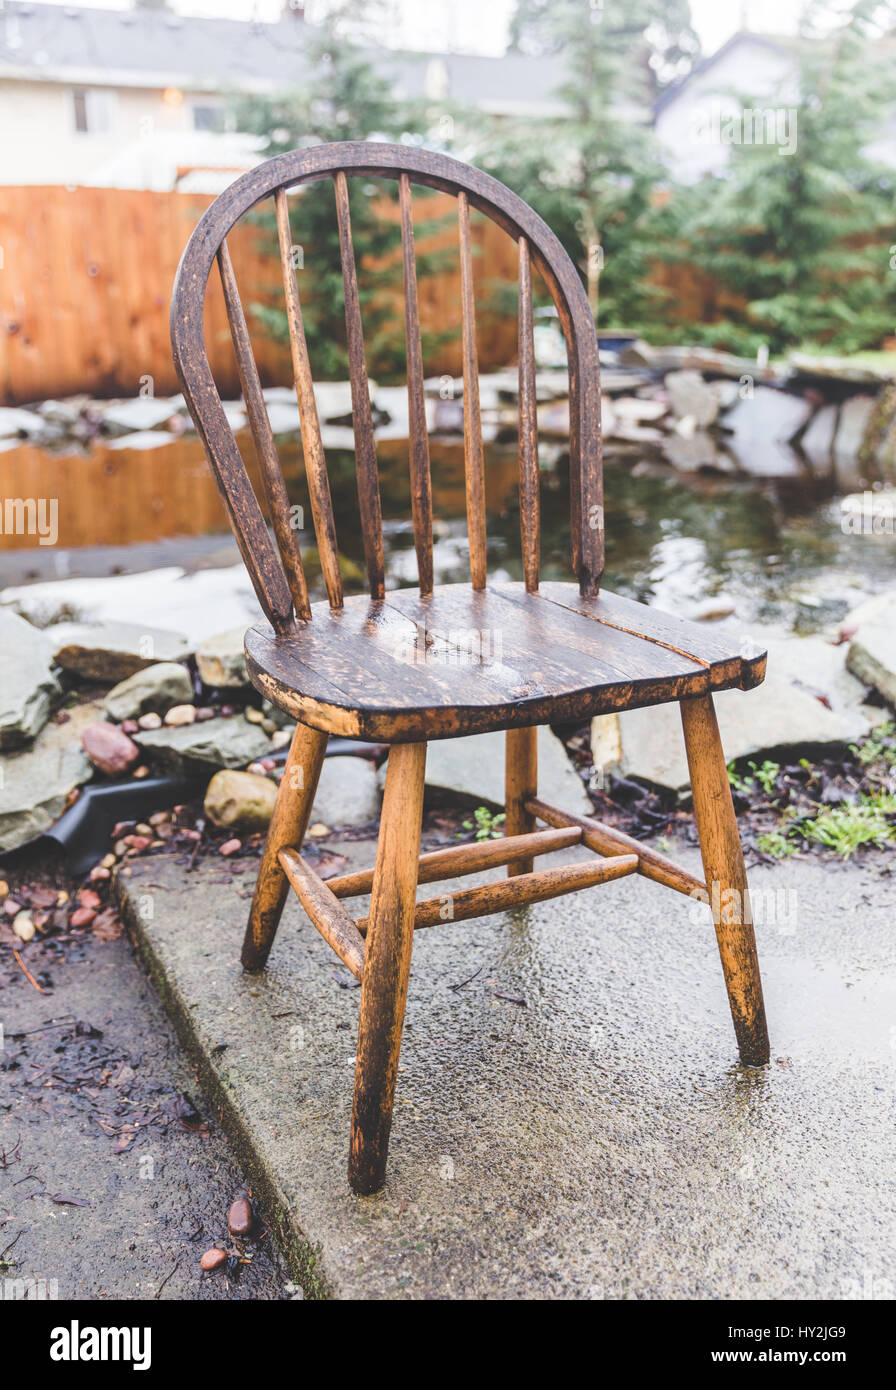 Antique, wooden chair in a home back yard near a pond in wet winter weather. Stock Photo